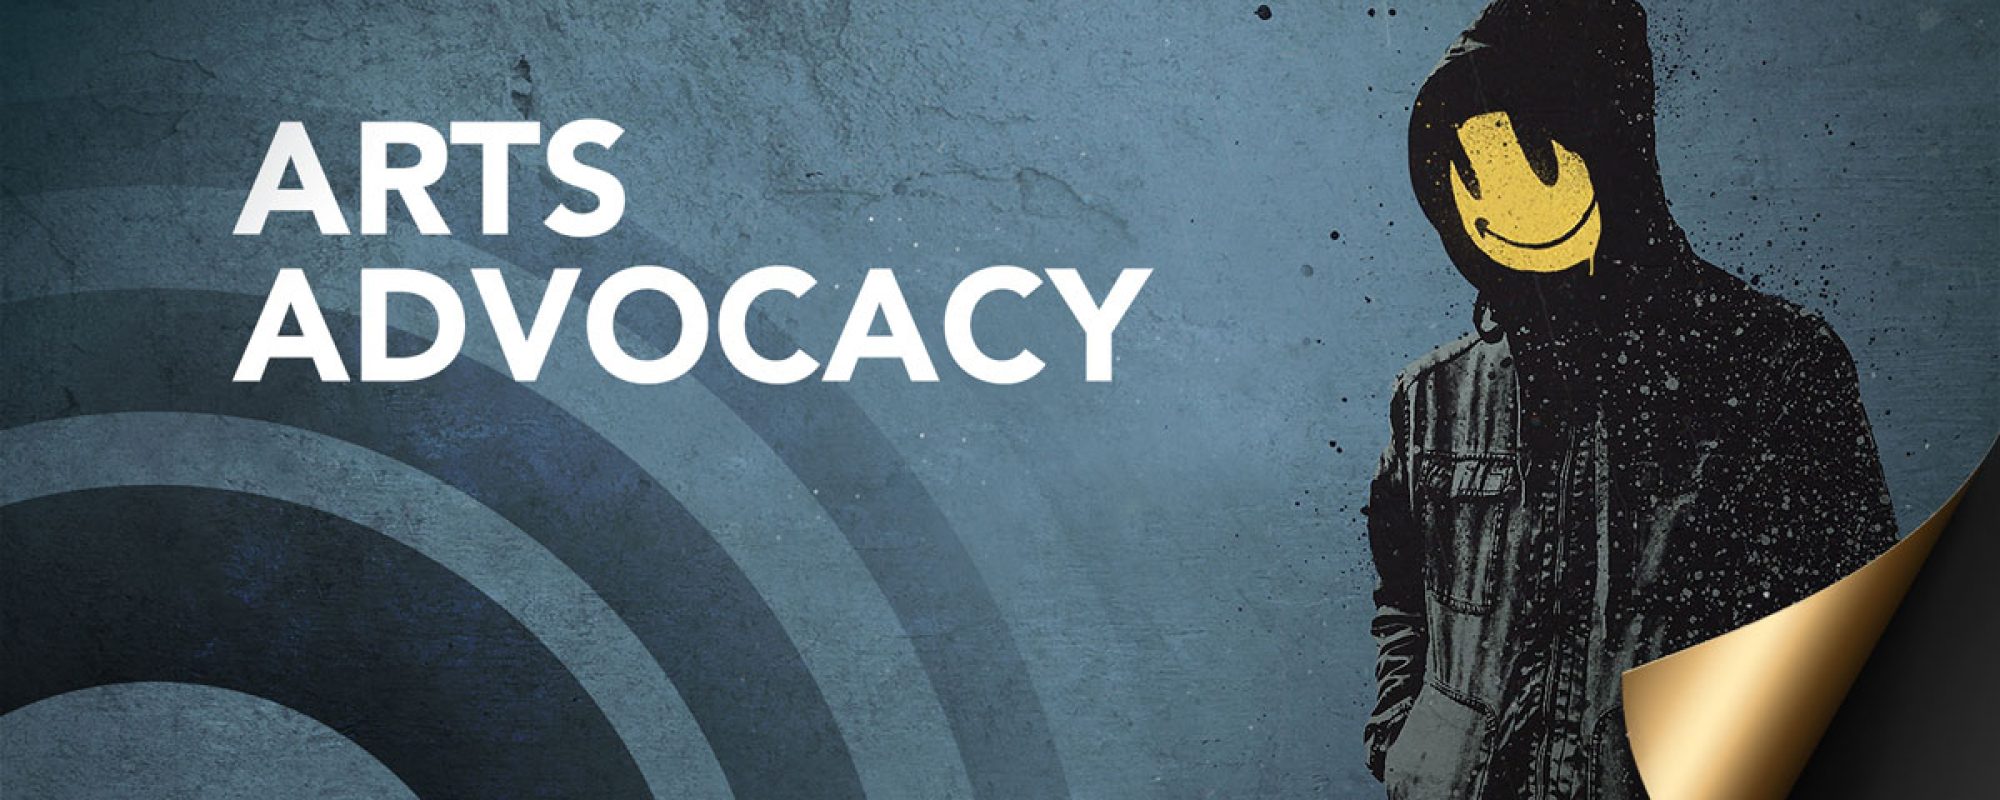 OVATION TV CELEBRATES ‘VIRTUAL’ ARTS ADVOCACY WEEK WITH SPECIAL MORNING BLOCK & CURATED ‘ARTS ADVOCACY’ FOLDER ON THE OVATION NOW APP; INCLUDING THE OVATION PREMIERE OF DOCUMENTARY BANKSY AND THE RISE OF OUTLAW ART